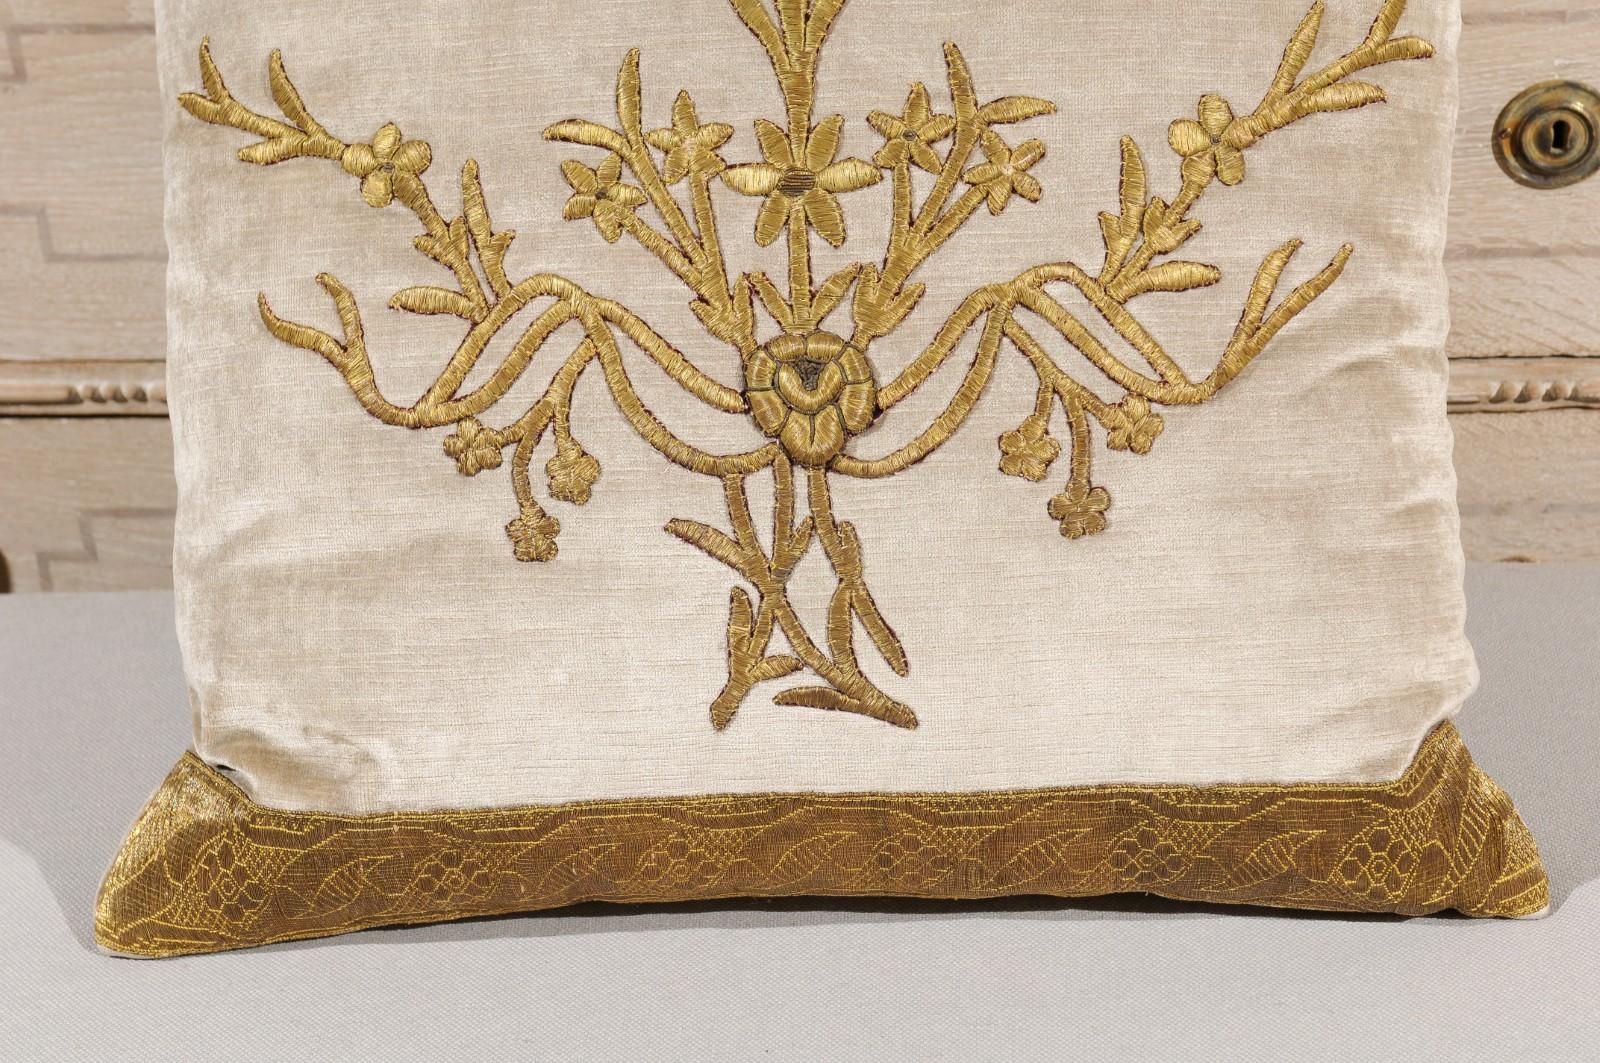 American Antique Ottoman Empire Raised Gold Metallic Embroidery on Silver Velvet Pillows For Sale